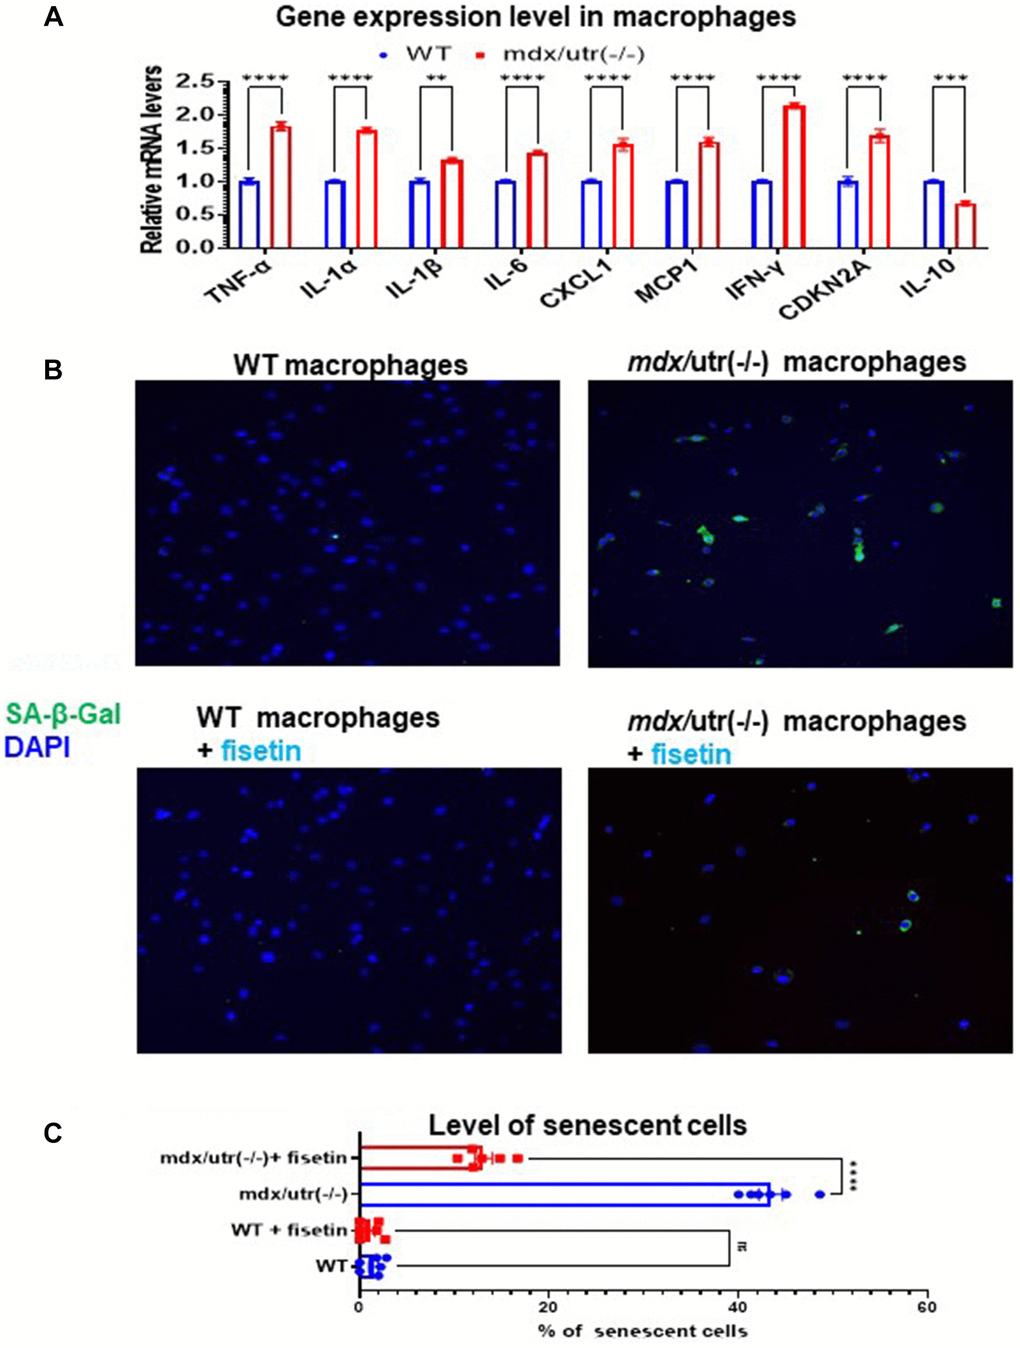 Fisetin treatment specifically remove senescent macrophages from mdx/utro(−/−) mouse. (A) Real time-PCR result of gene expression level of SASP factors, p16 and IL-10 in WT and mdx/utro(−/−) macrophages (n = 3 cell lineages). (B) Staining of SA-β-Gal in 4 groups of macrophages with fluorescent Senescence Assay Kit. Fisetin was applied to treat the WT and mdx/utro(−/−) macrophages for 48 hr at 20 μM of concentration. (C) Statistics of SA-β-Gal+ cells in 4 groups of cells. n = 6 (3 cell lineages x 2 replicates/group). Data are presented as mean +/− SD.